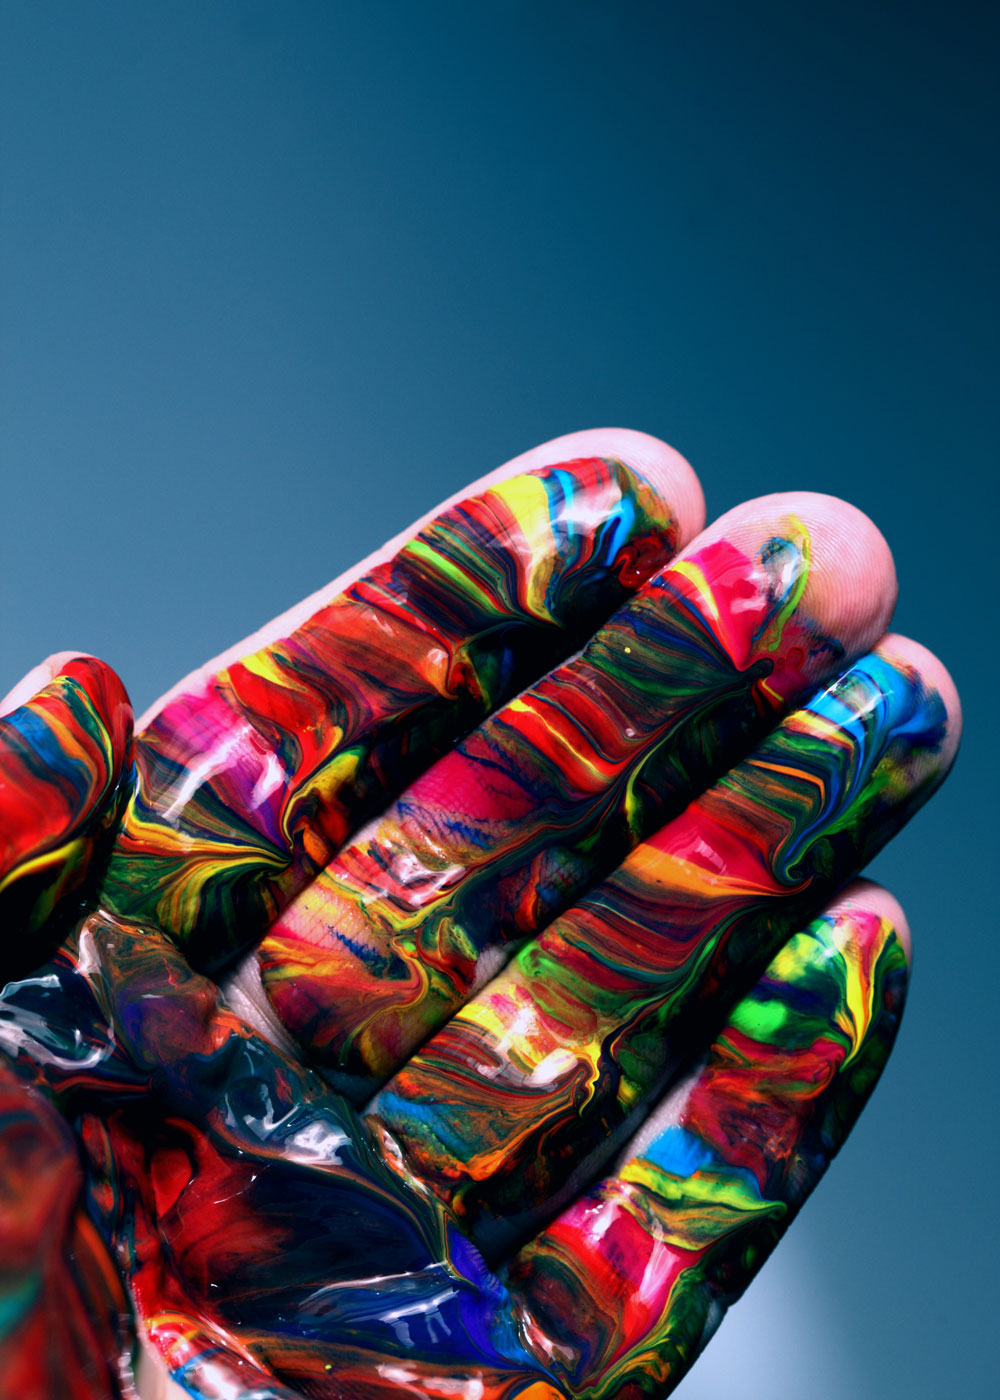 An image of the palm of a hand, painted all colors of the rainbow